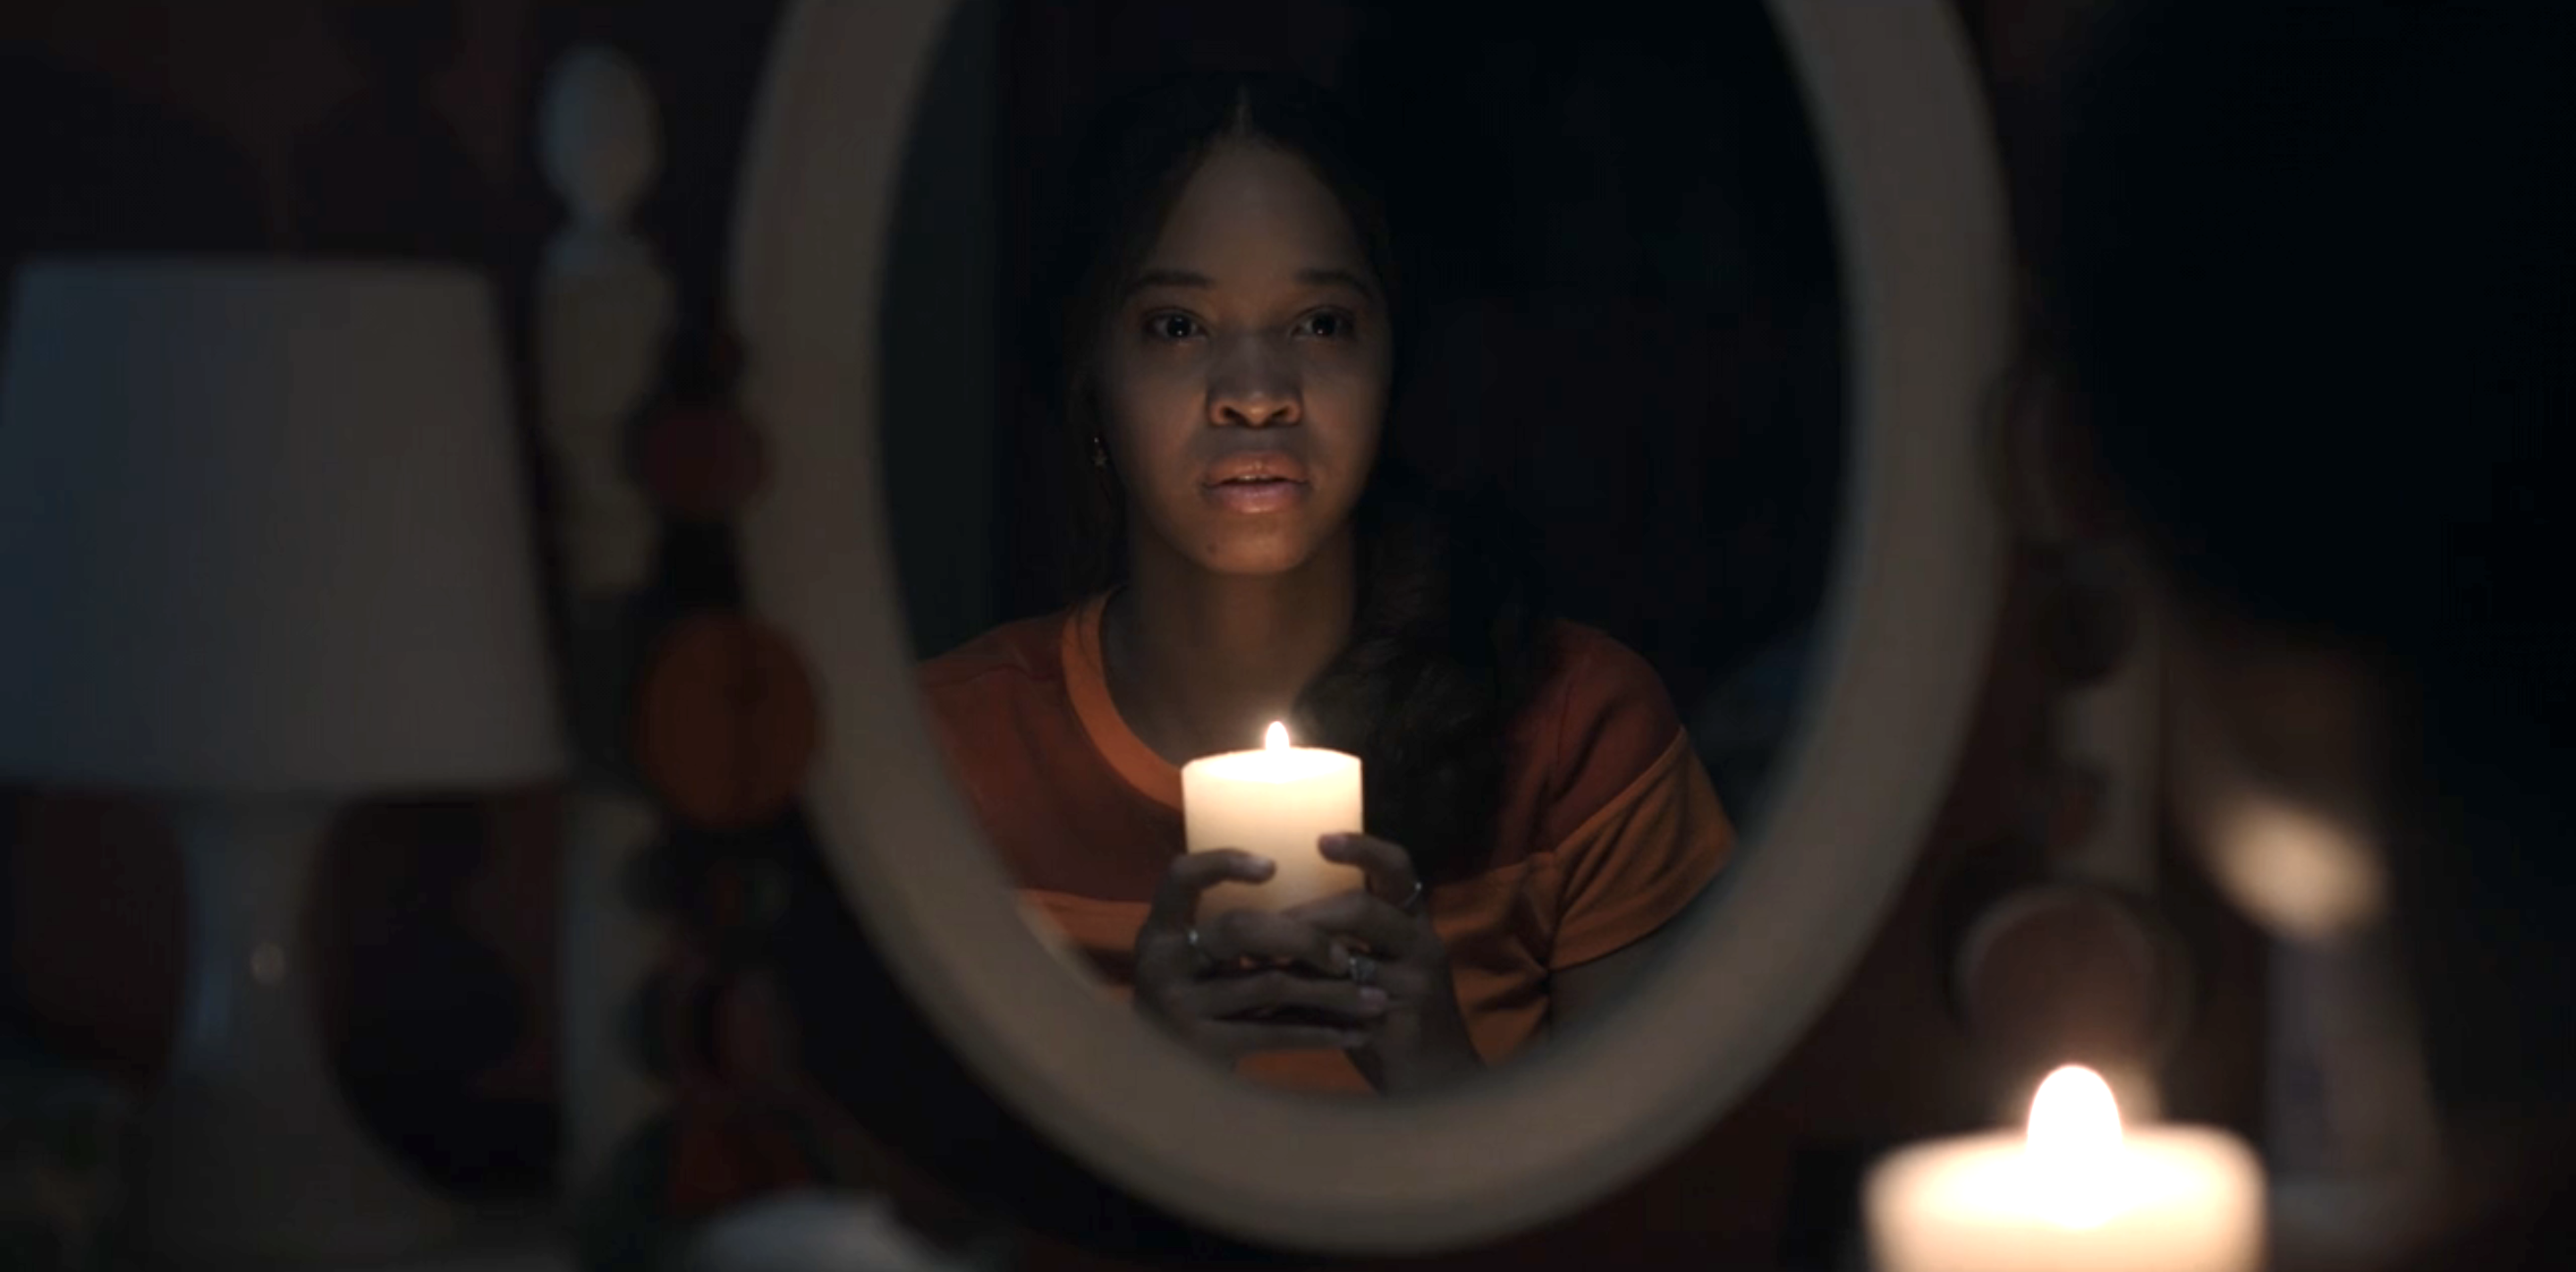 A young woman holding a candle with a very scared expression and looking into the mirror